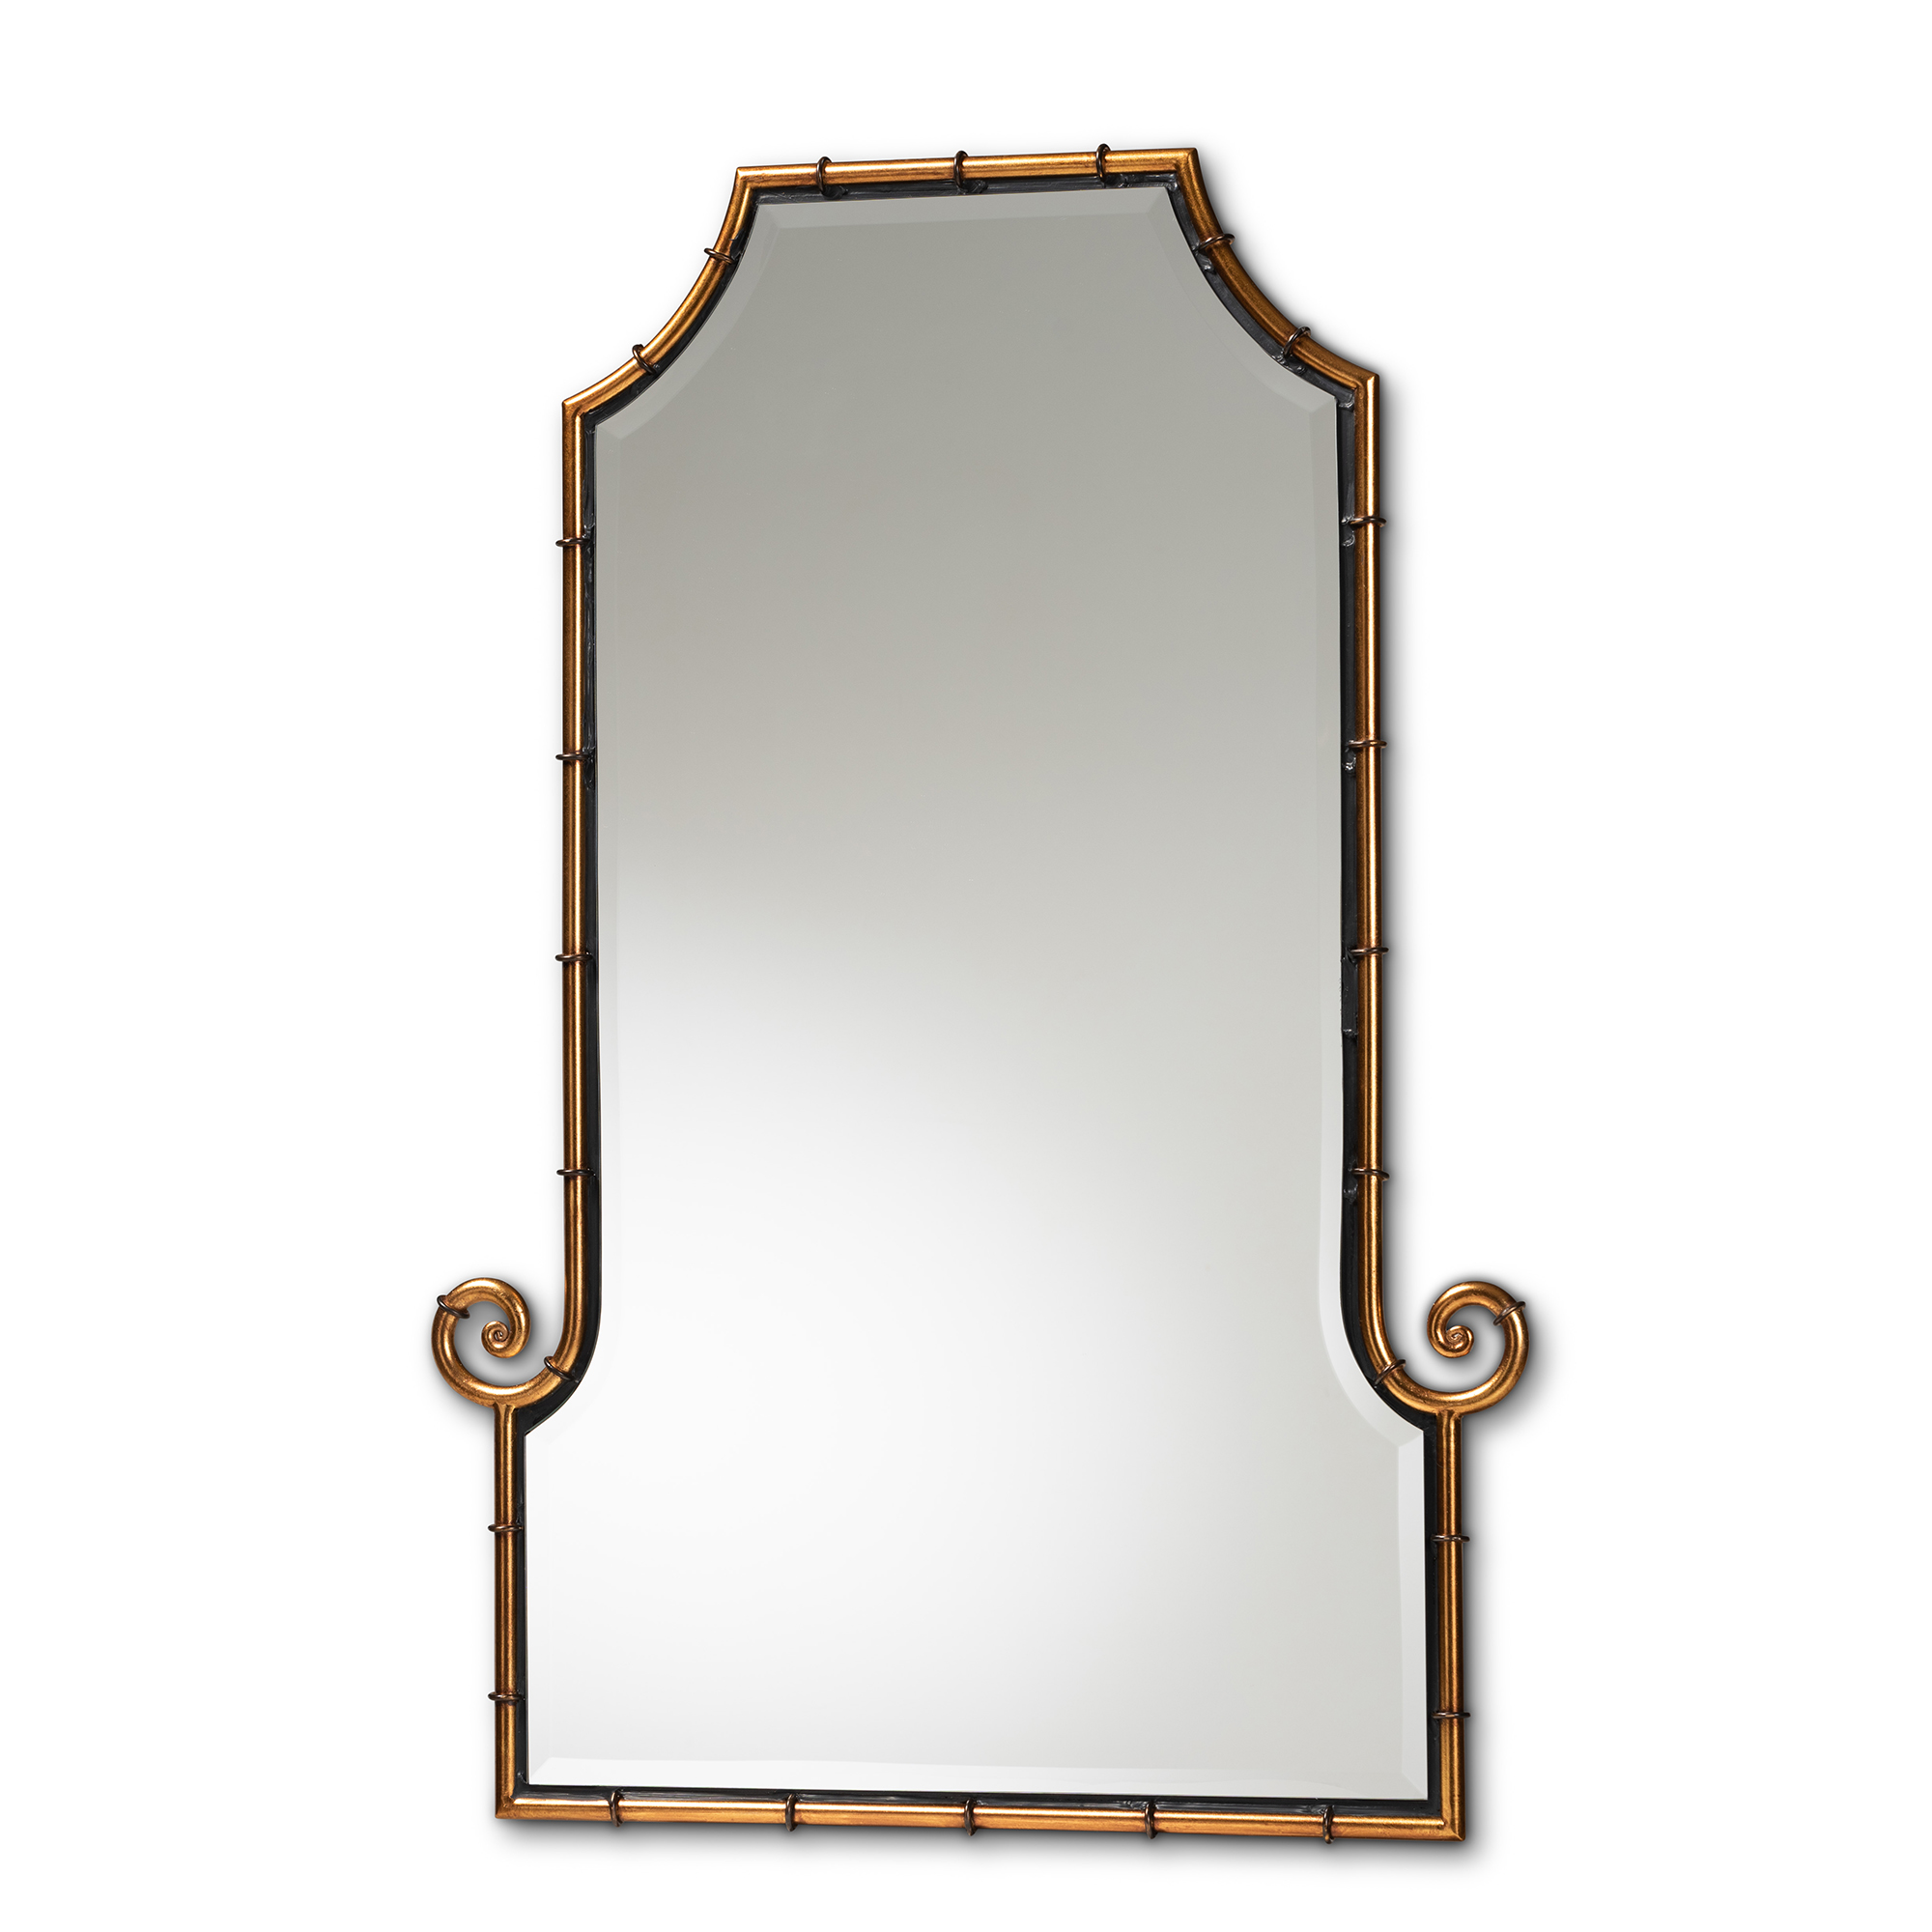 Baxton Studio Layan Glamourous Hollywood Regency Style Gold Finished Metal Bamboo Inspired Accent Wall Mirror